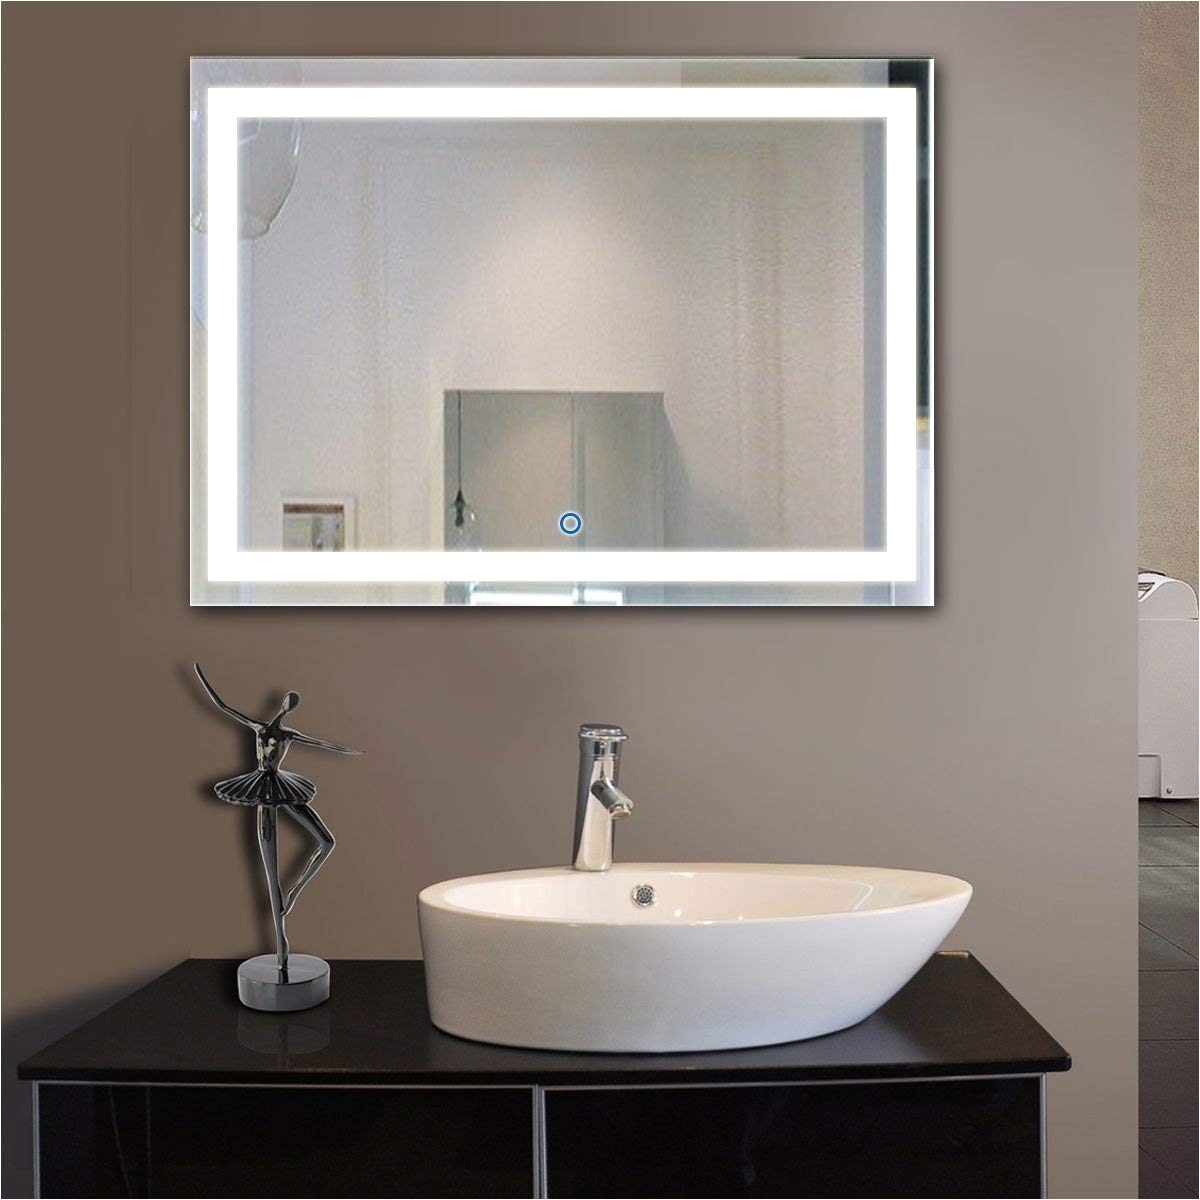 amazon com dp home large illuminated lighted makeup mirror led wall mounted backlit bathroom vanity mirror with touch sensor48 x 36 in e ck010 d home